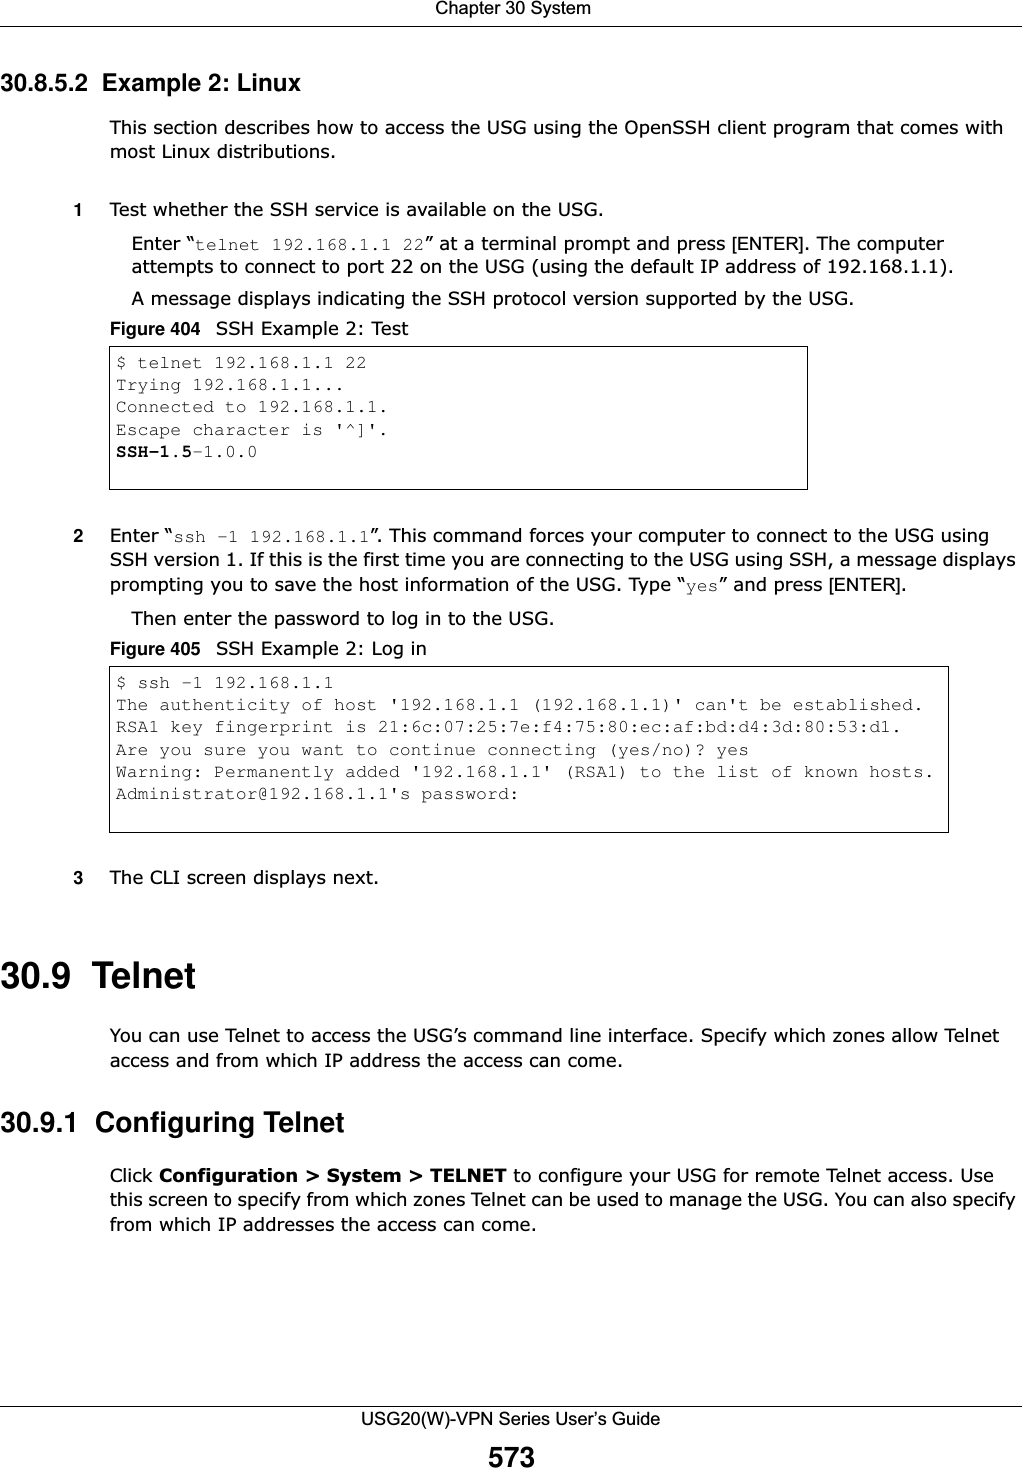  Chapter 30 SystemUSG20(W)-VPN Series User’s Guide57330.8.5.2  Example 2: LinuxThis section describes how to access the USG using the OpenSSH client program that comes with most Linux distributions. 1Test whether the SSH service is available on the USG. Enter “telnet 192.168.1.1 22” at a terminal prompt and press [ENTER]. The computer attempts to connect to port 22 on the USG (using the default IP address of 192.168.1.1). A message displays indicating the SSH protocol version supported by the USG. Figure 404   SSH Example 2: Test 2Enter “ssh –1 192.168.1.1”. This command forces your computer to connect to the USG using SSH version 1. If this is the first time you are connecting to the USG using SSH, a message displays prompting you to save the host information of the USG. Type “yes” and press [ENTER]. Then enter the password to log in to the USG. Figure 405   SSH Example 2: Log in3The CLI screen displays next. 30.9  Telnet You can use Telnet to access the USG’s command line interface. Specify which zones allow Telnet access and from which IP address the access can come.30.9.1  Configuring TelnetClick Configuration &gt; System &gt; TELNET to configure your USG for remote Telnet access. Use this screen to specify from which zones Telnet can be used to manage the USG. You can also specify from which IP addresses the access can come.$ telnet 192.168.1.1 22Trying 192.168.1.1...Connected to 192.168.1.1.Escape character is &apos;^]&apos;.SSH-1.5-1.0.0$ ssh –1 192.168.1.1The authenticity of host &apos;192.168.1.1 (192.168.1.1)&apos; can&apos;t be established.RSA1 key fingerprint is 21:6c:07:25:7e:f4:75:80:ec:af:bd:d4:3d:80:53:d1.Are you sure you want to continue connecting (yes/no)? yesWarning: Permanently added &apos;192.168.1.1&apos; (RSA1) to the list of known hosts.Administrator@192.168.1.1&apos;s password: